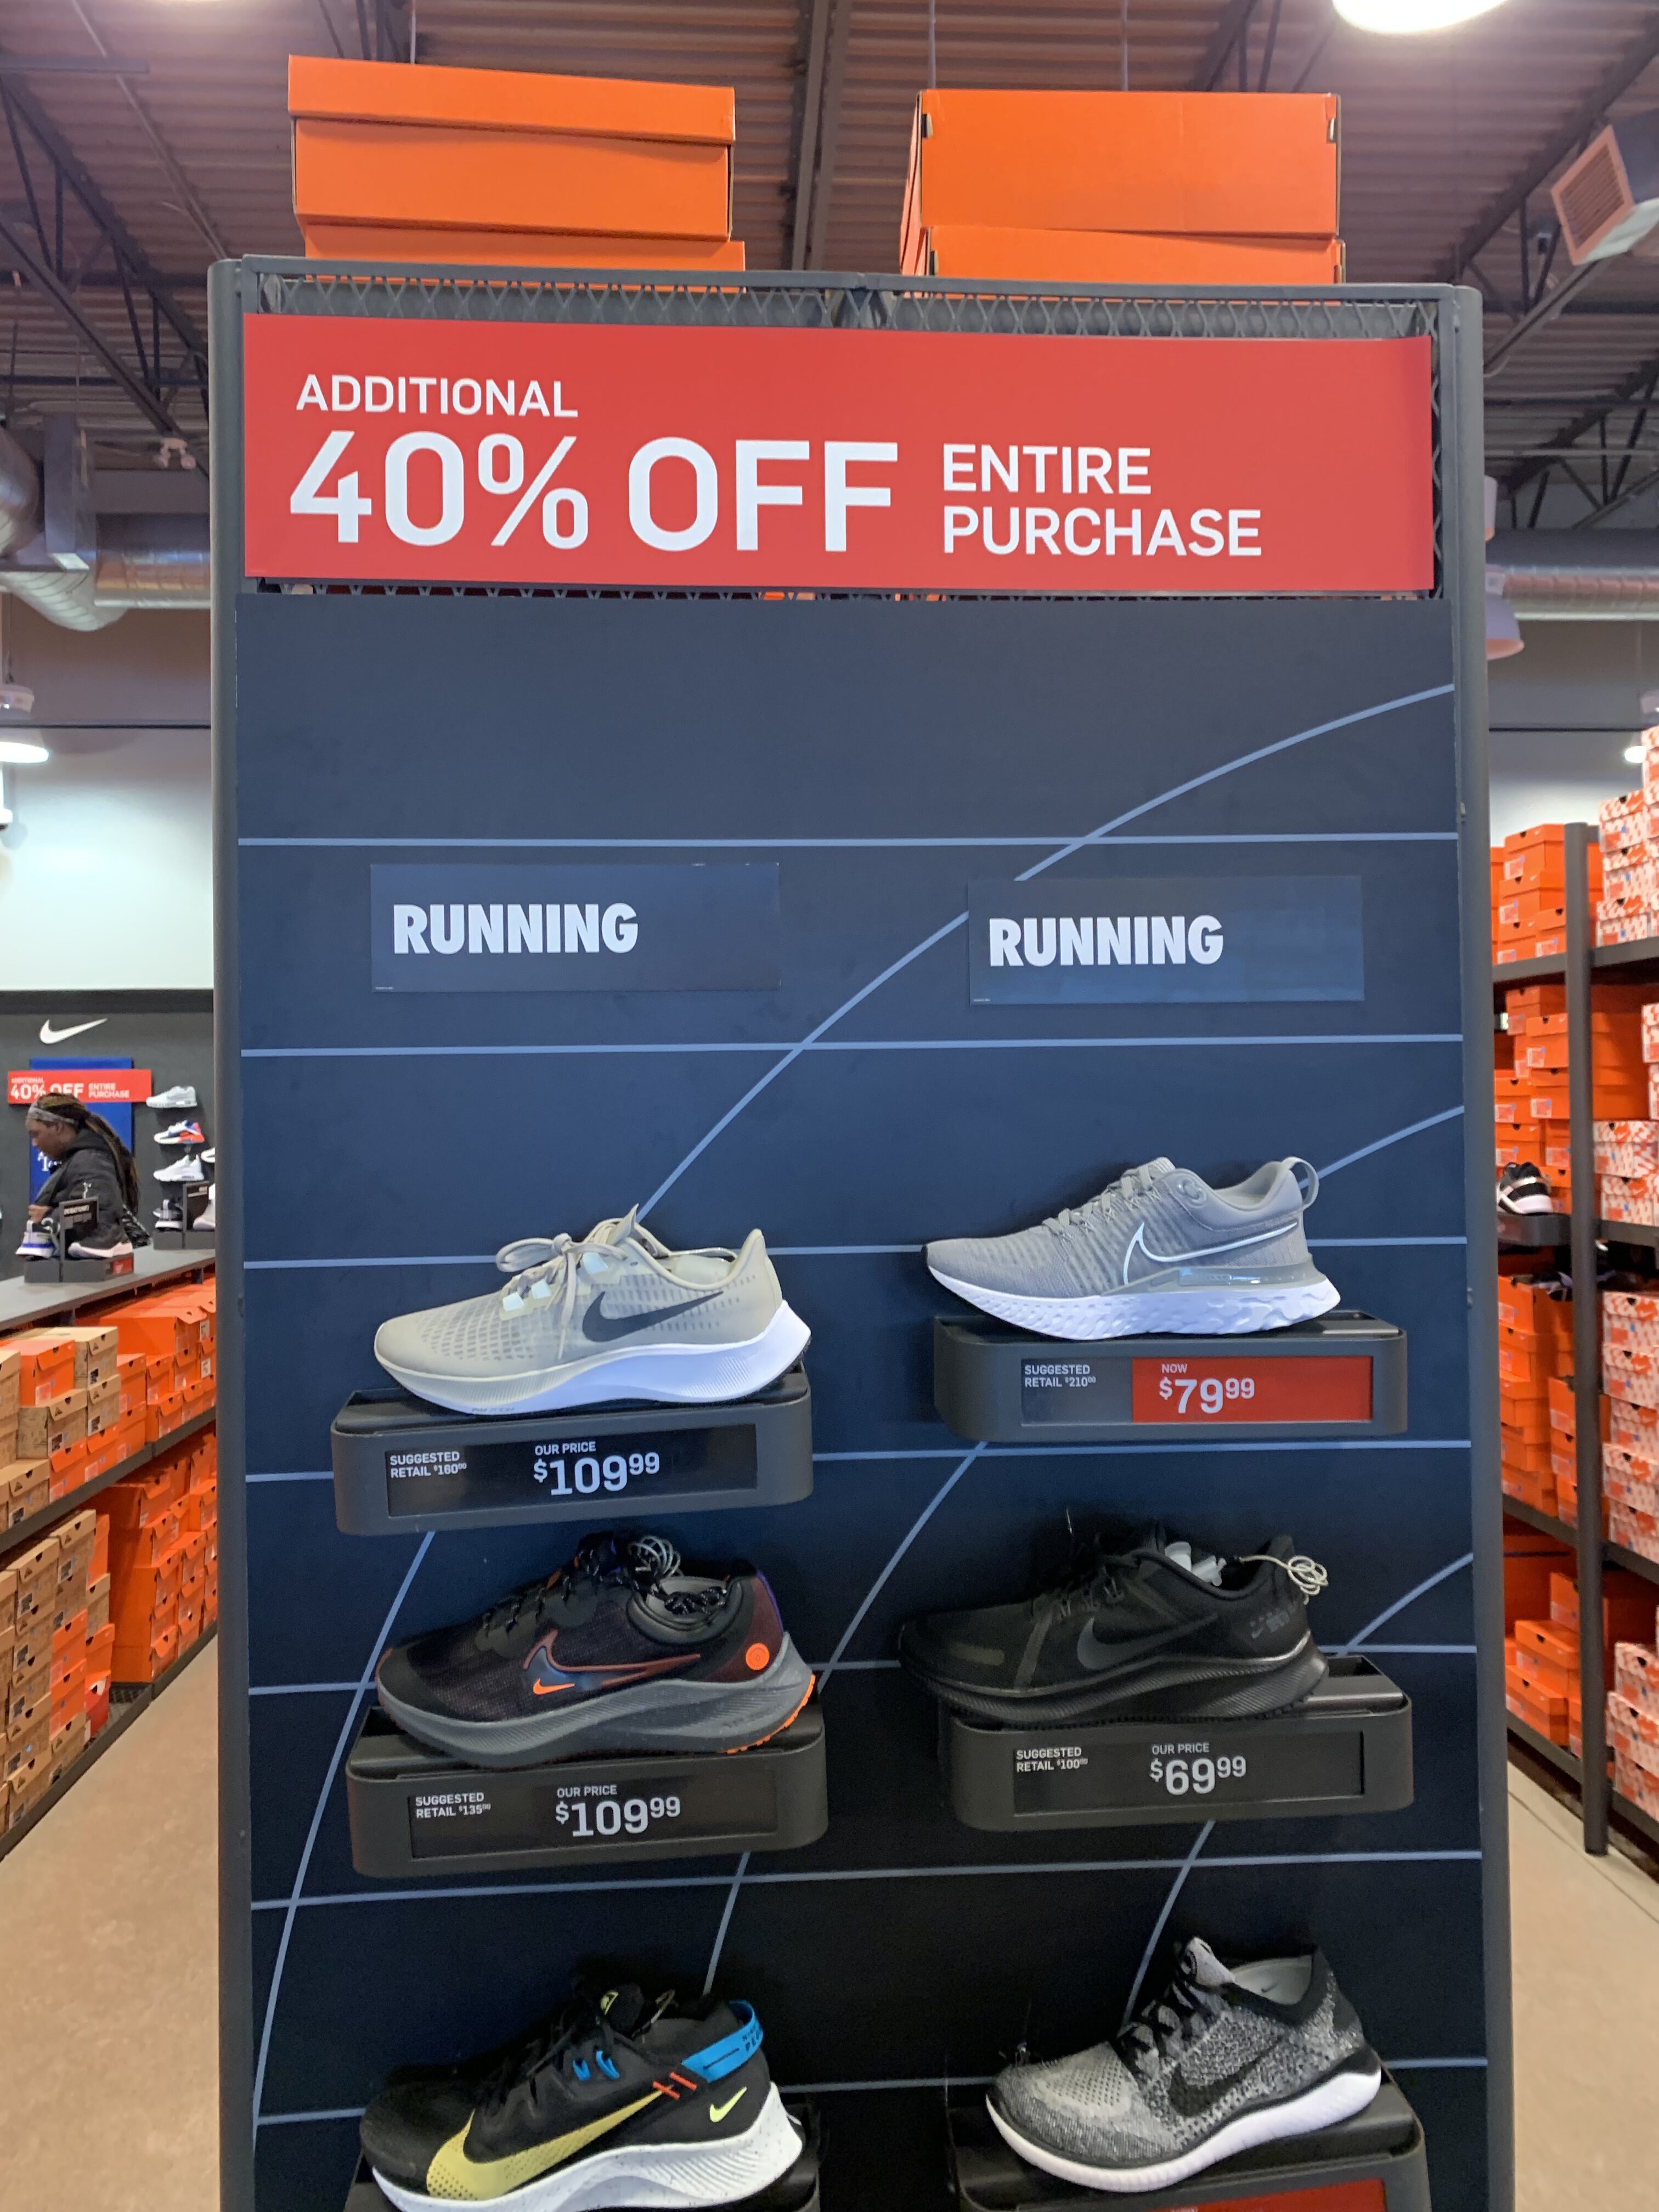 Nike Outlet off entire purchase - RedFlagDeals.com Forums